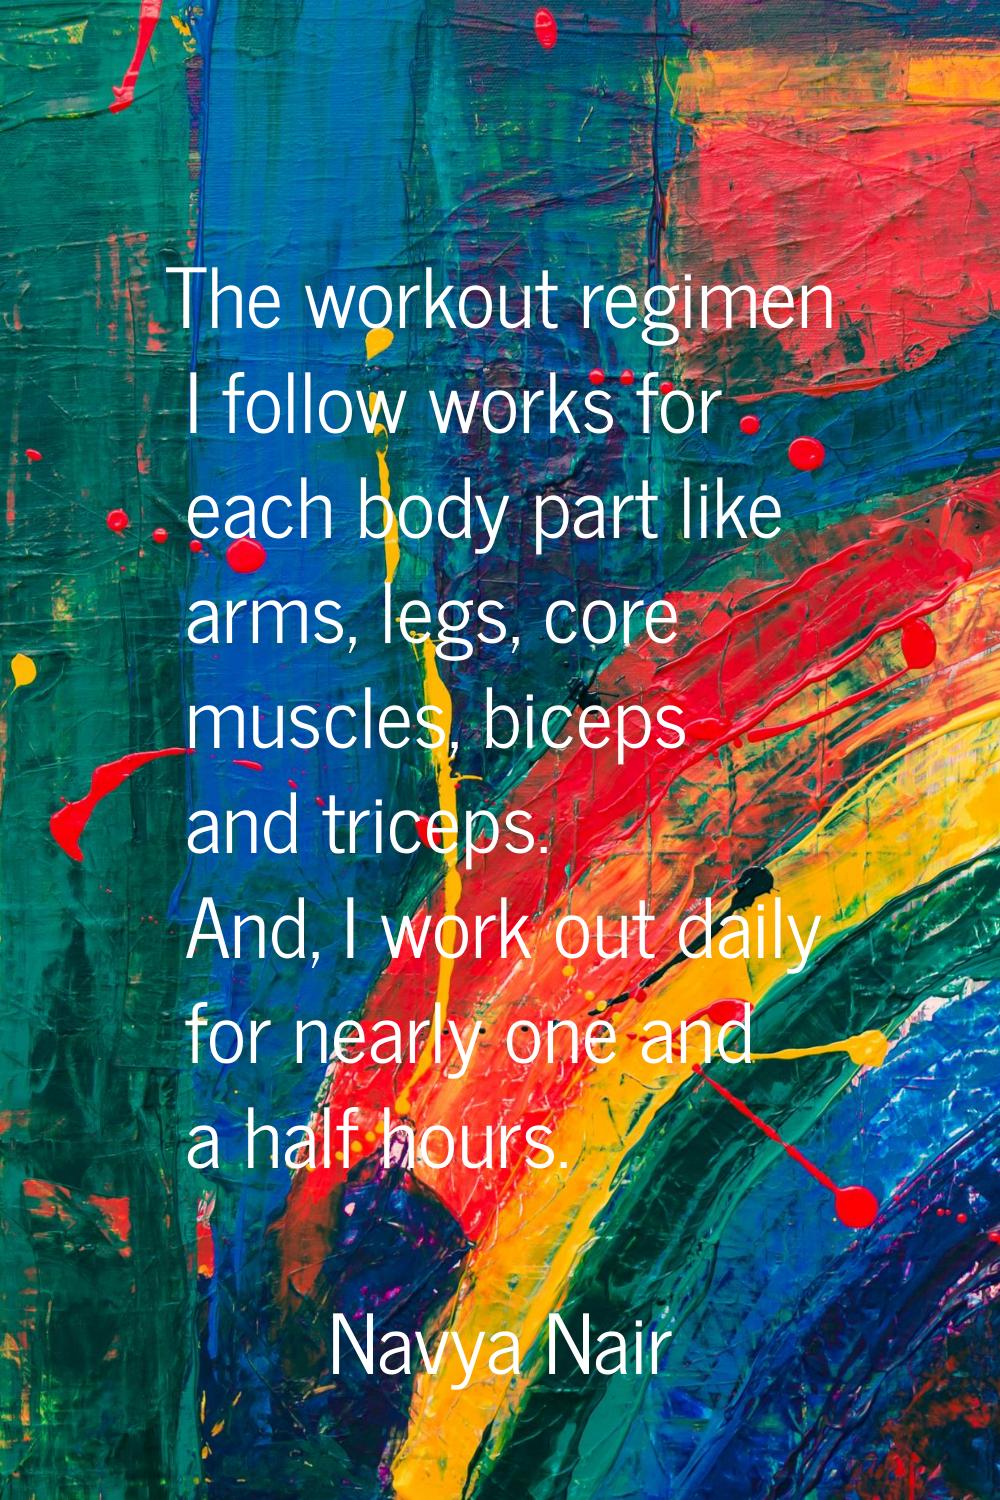 The workout regimen I follow works for each body part like arms, legs, core muscles, biceps and tri